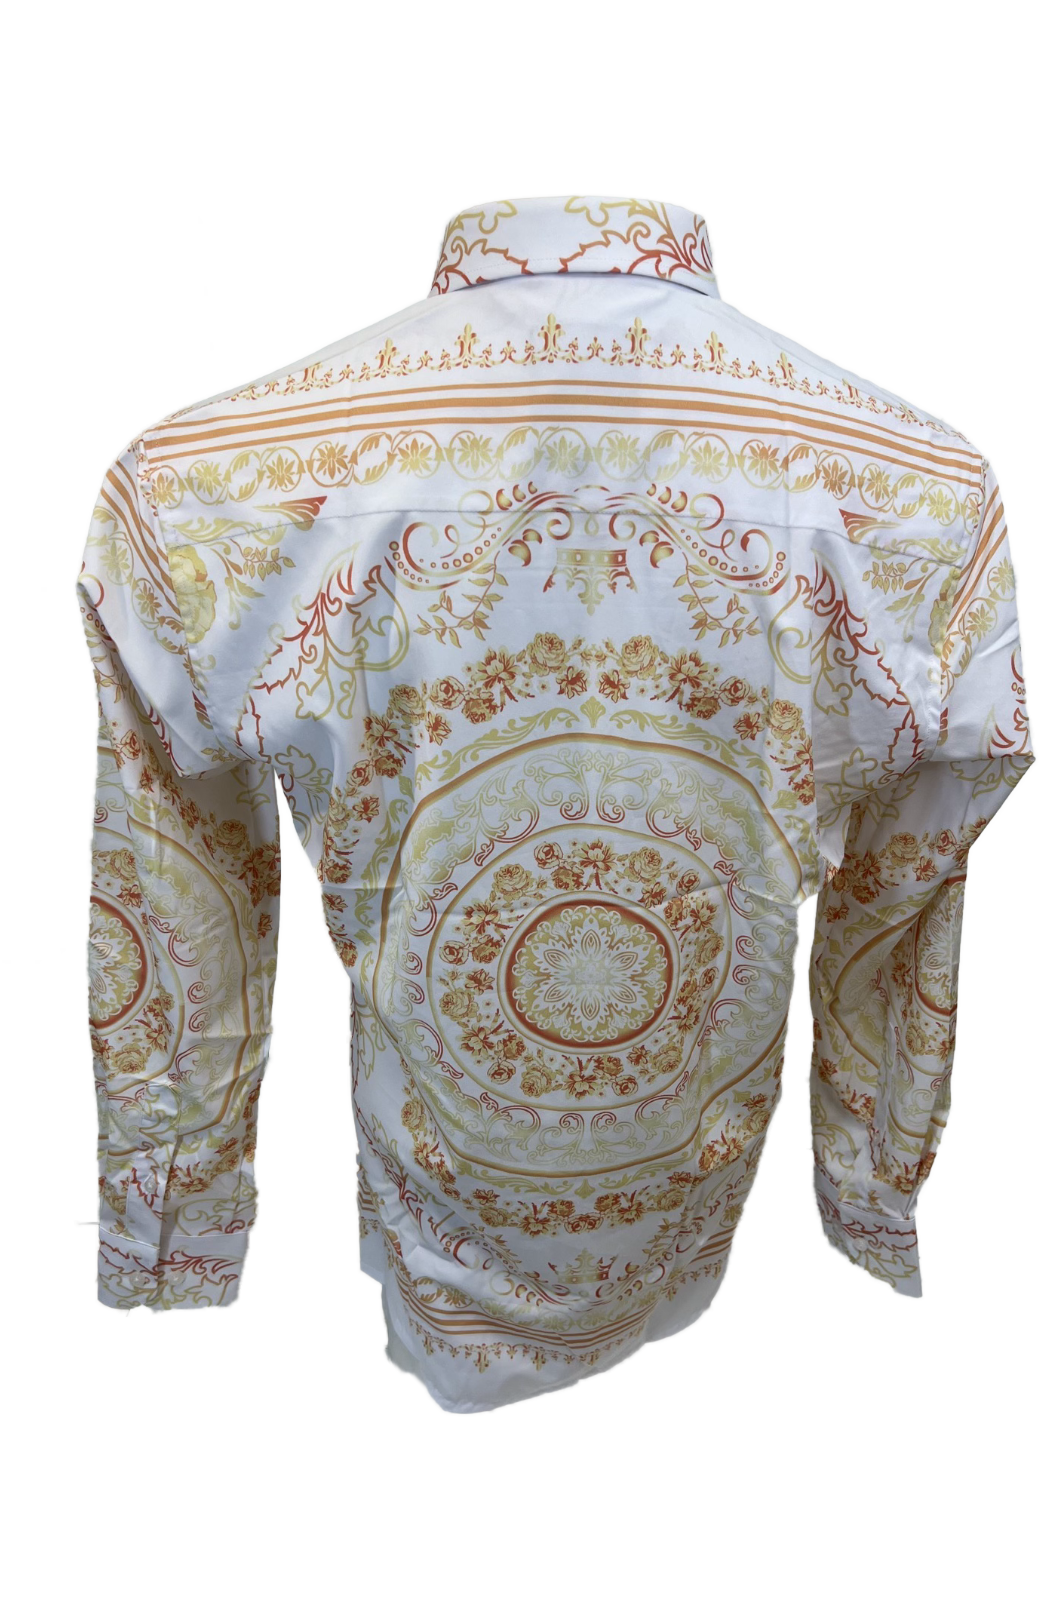 Men's Silky Long Sleeve Button Down Dress Shirt White Gold Colorful Floral Leaf Tribal Chain